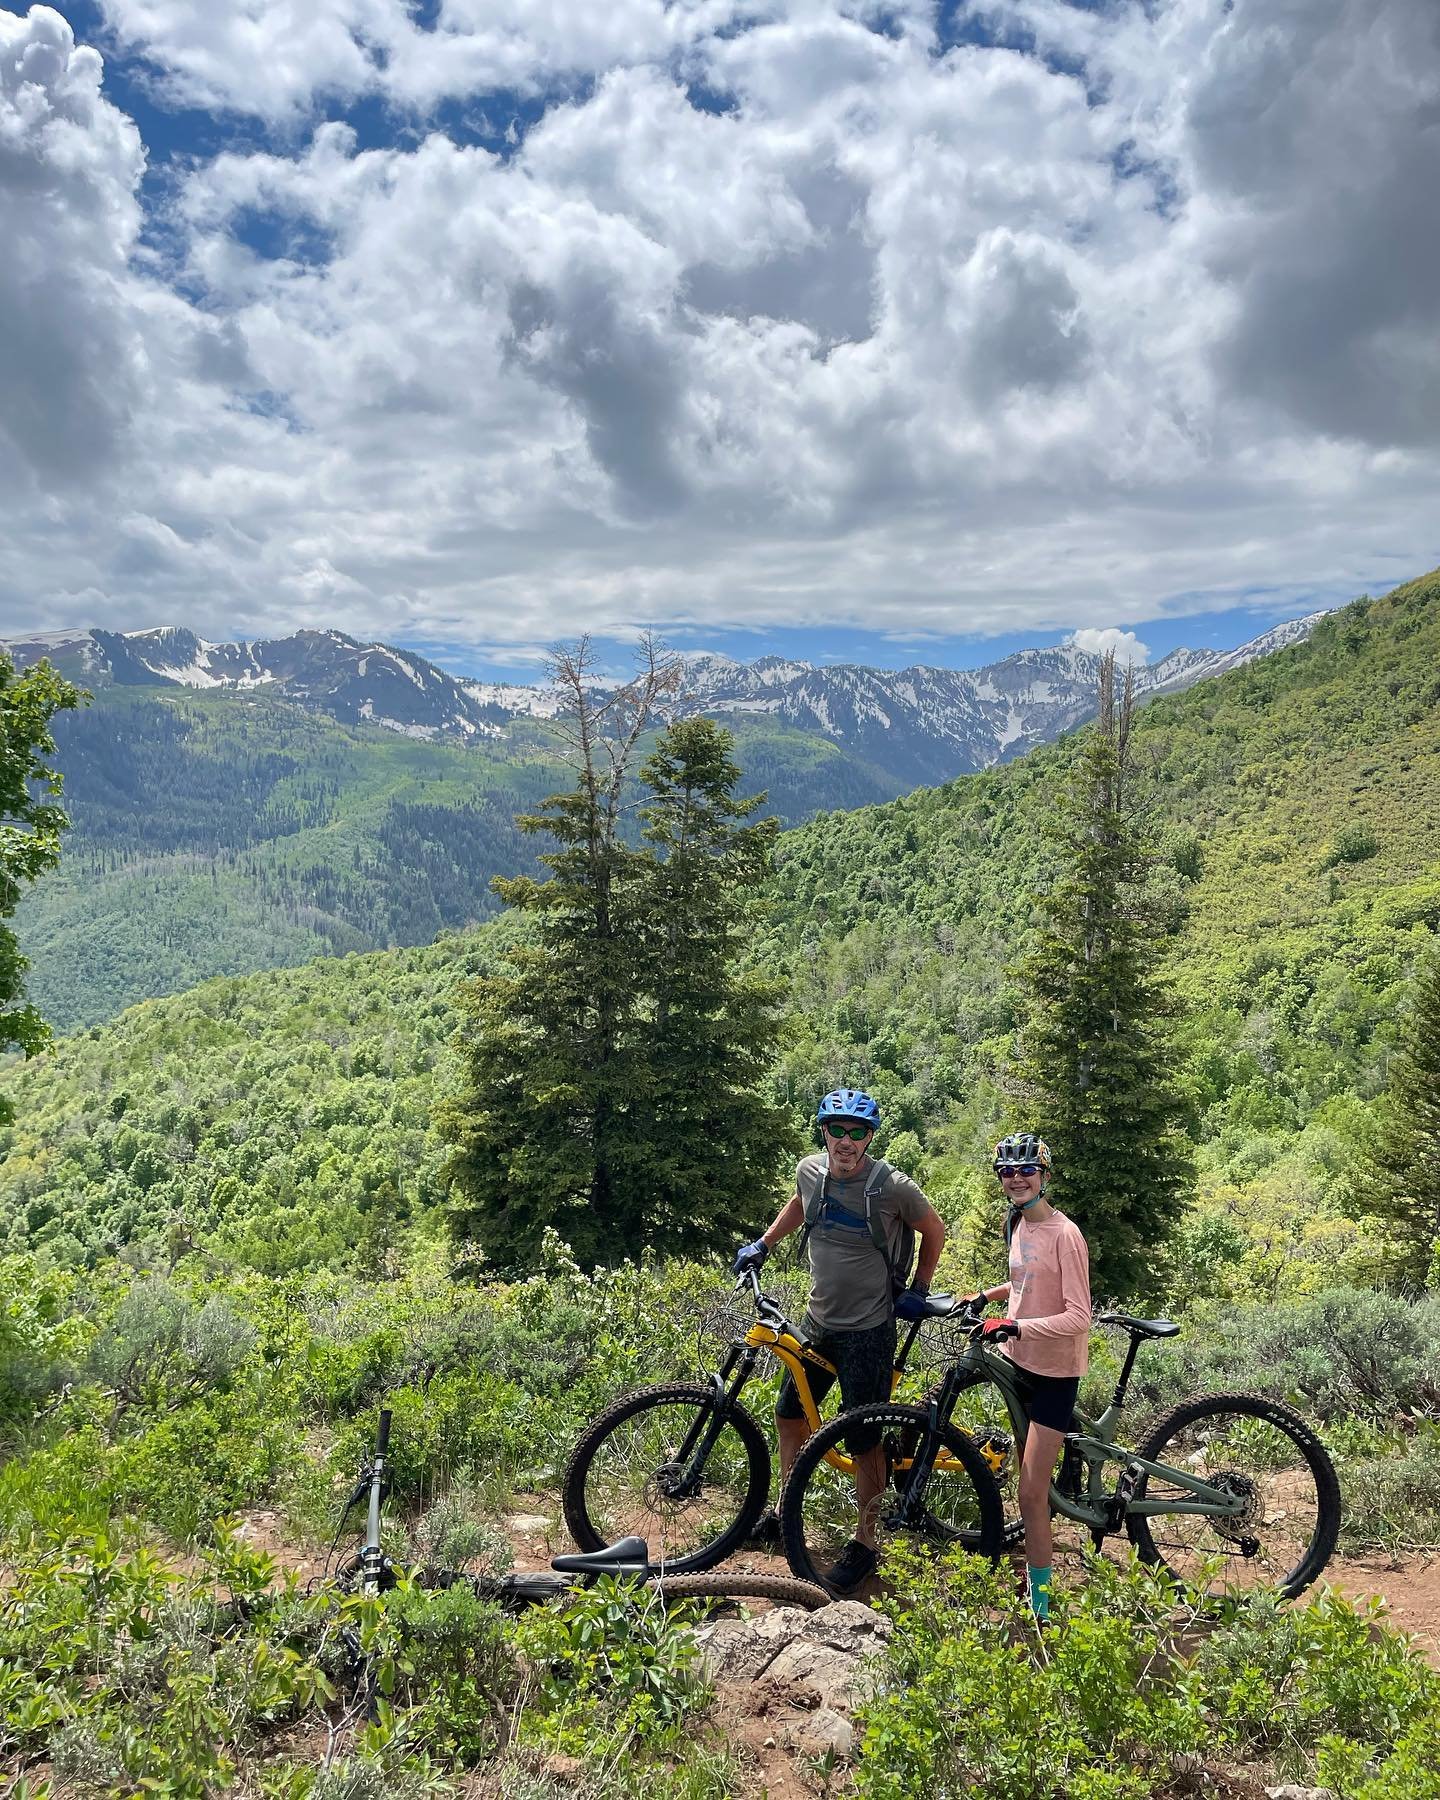 Backcountry bike tours great for you and the family. Contact us today to schedule or stop into our Deer Valley or Park City location to speak to one of our local guides and get the details. Rental bikes / helmets and pads included. #oldtownbikegarage